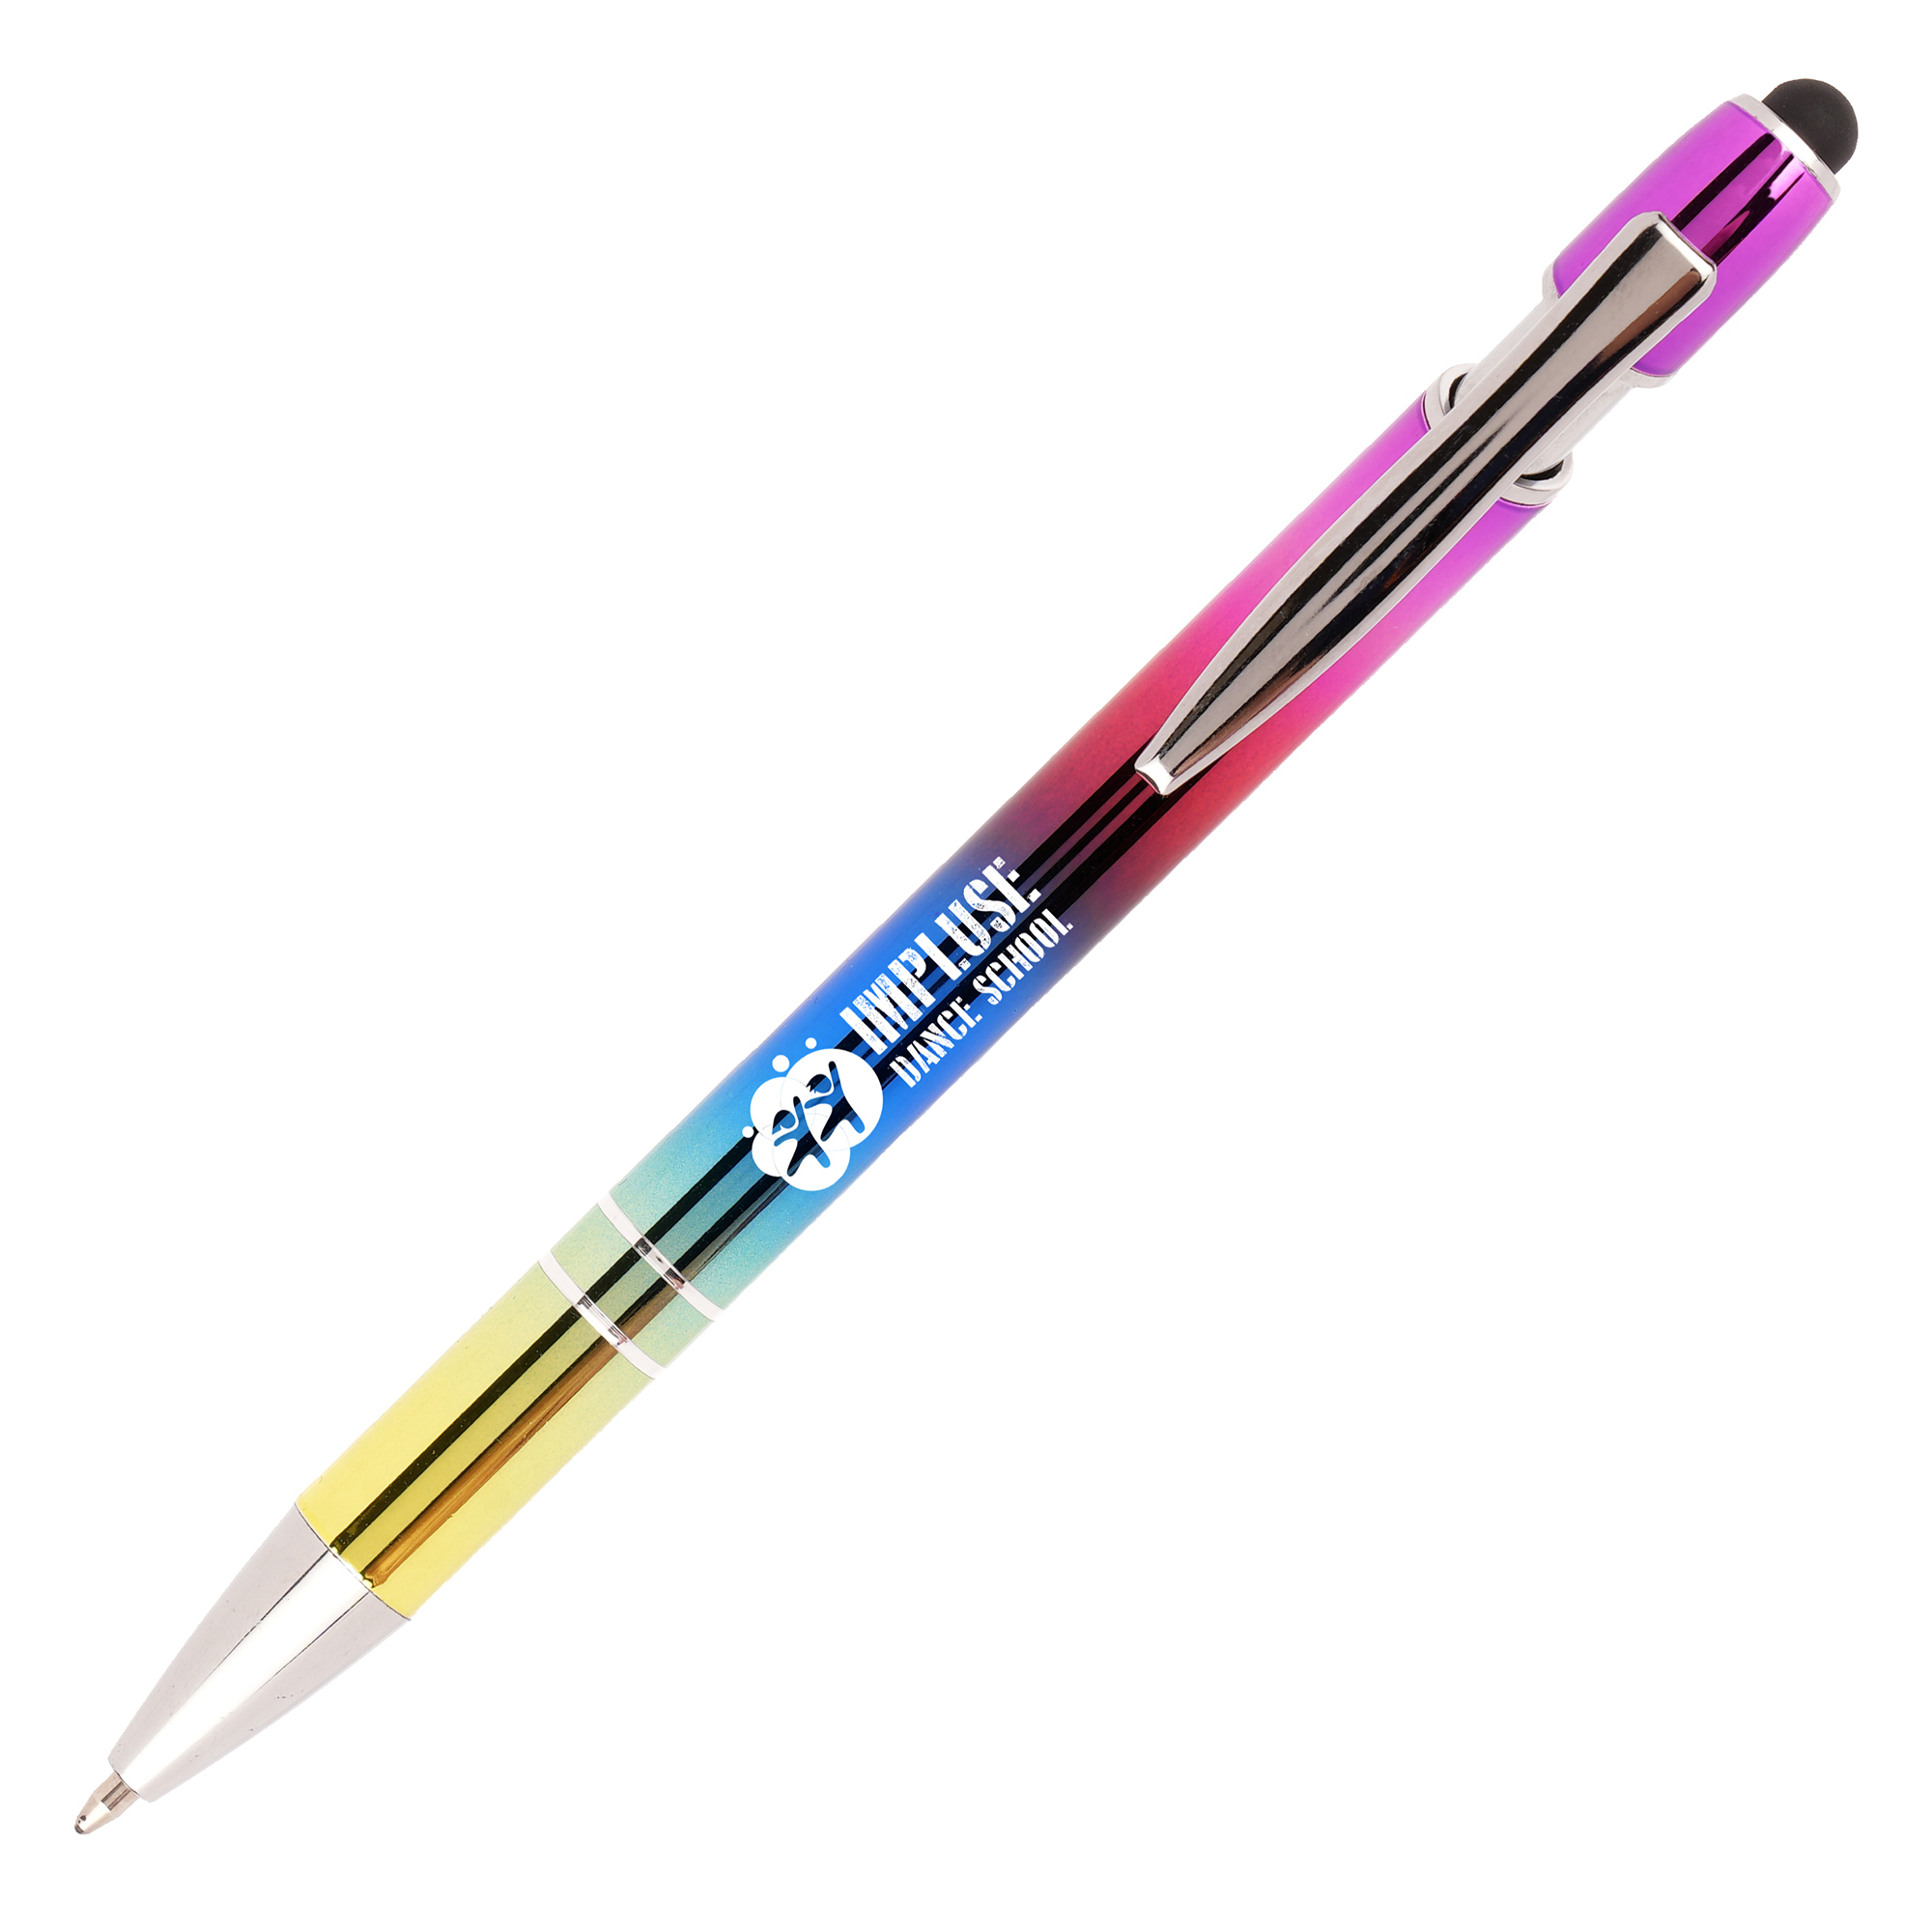 The rainbow version of a much loved best seller! This push action ball pen has a modern design with a useful stylus top. The vibrant rainbow effect produces an eye catching product. Due to the finish marking is engraving only.